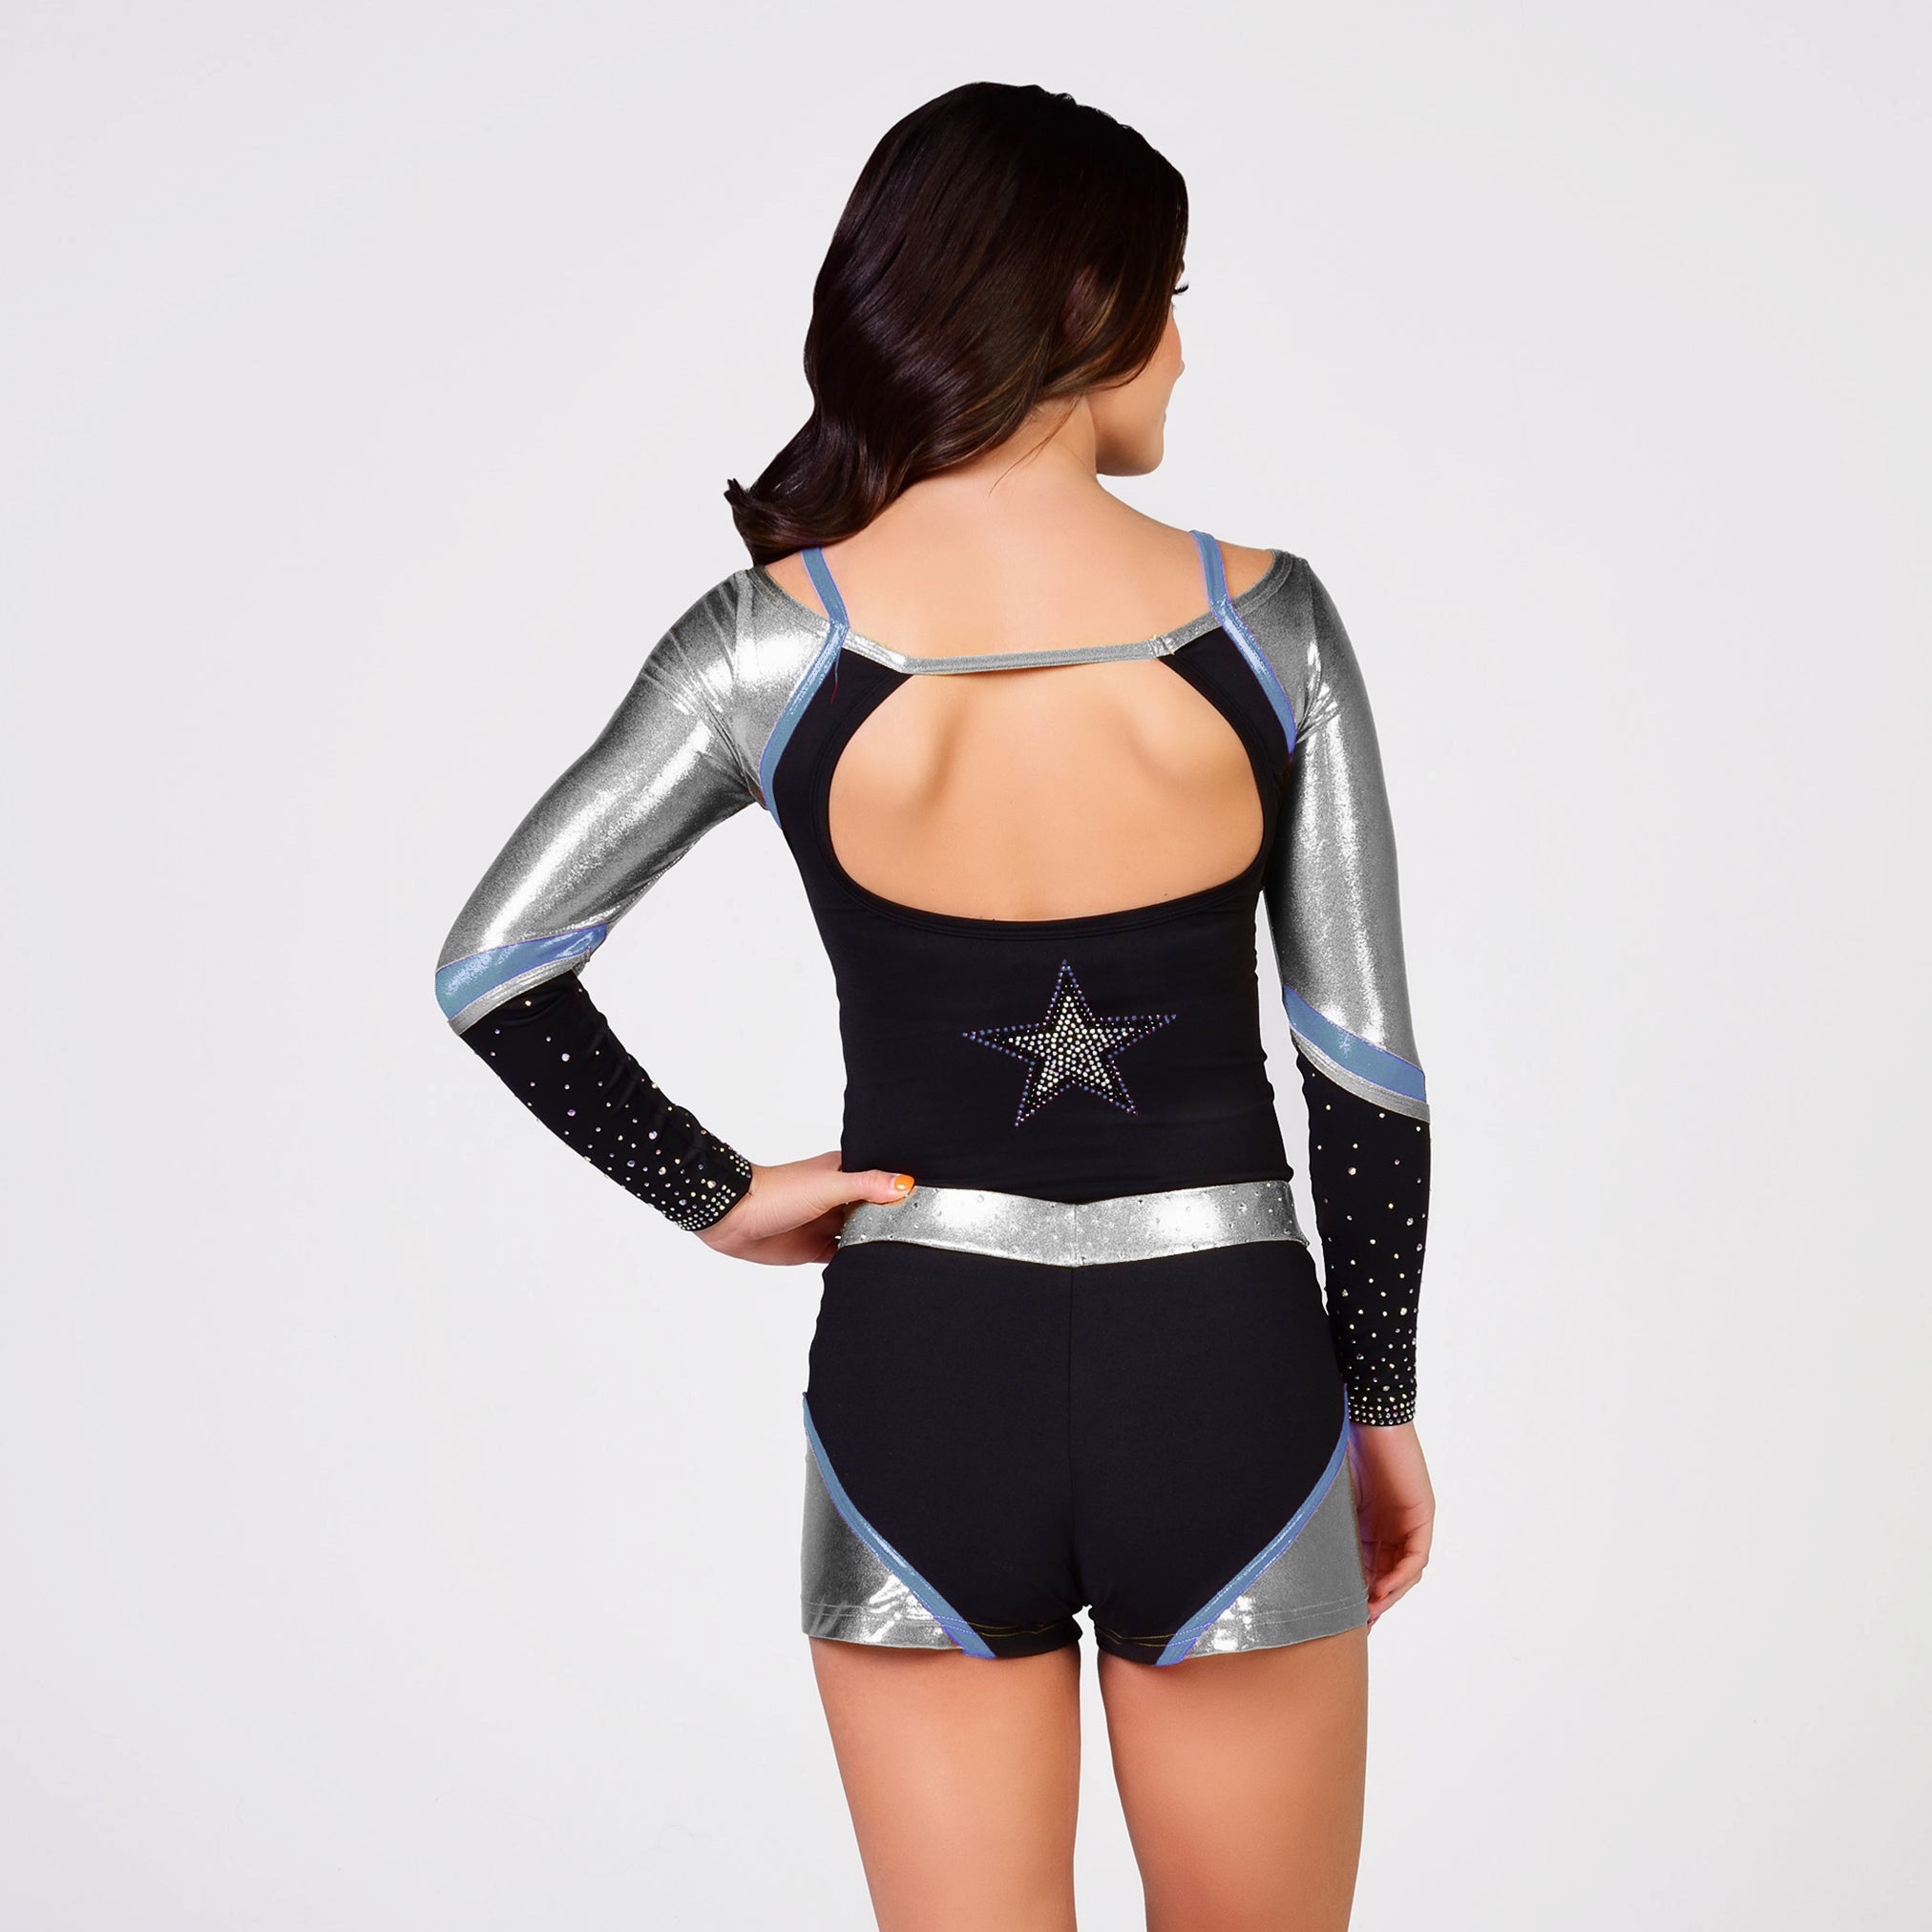 Journey Uniform with Metallic arms and V-waist Shorts - Columbia blue